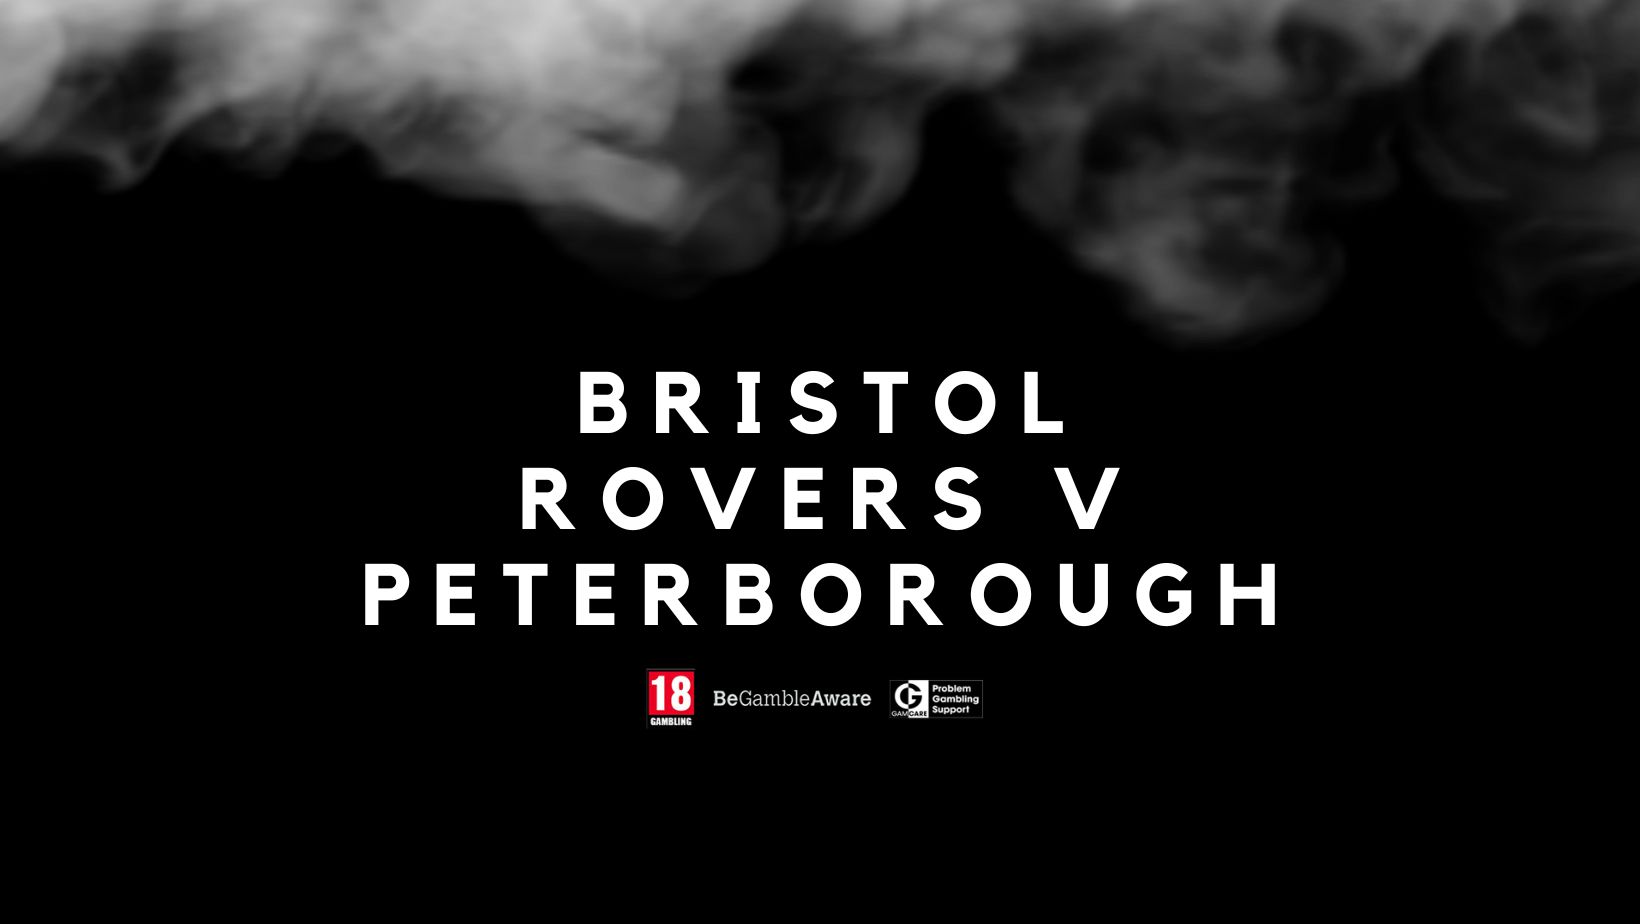 Bristol Rovers v Peterborough live streaming – where to watch on TV